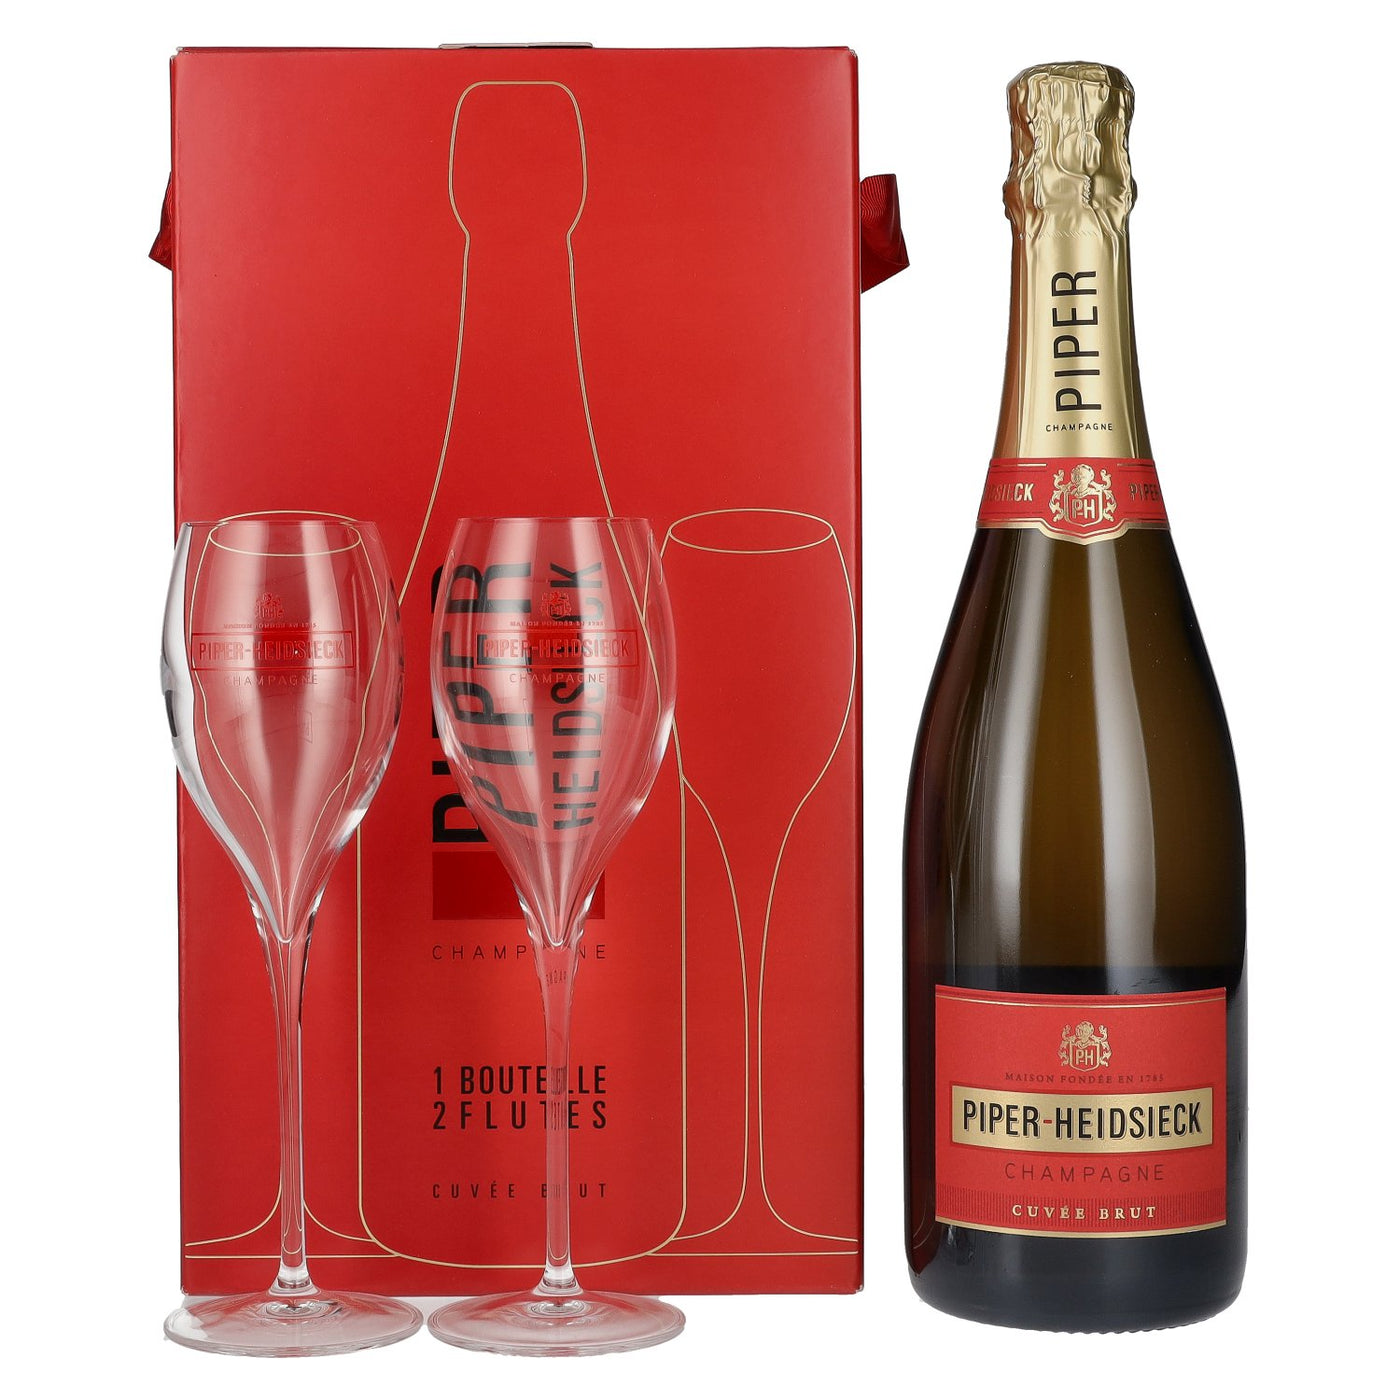 BUY] Piper-Heidsieck | Cuvee Brut with Glasses - NV at